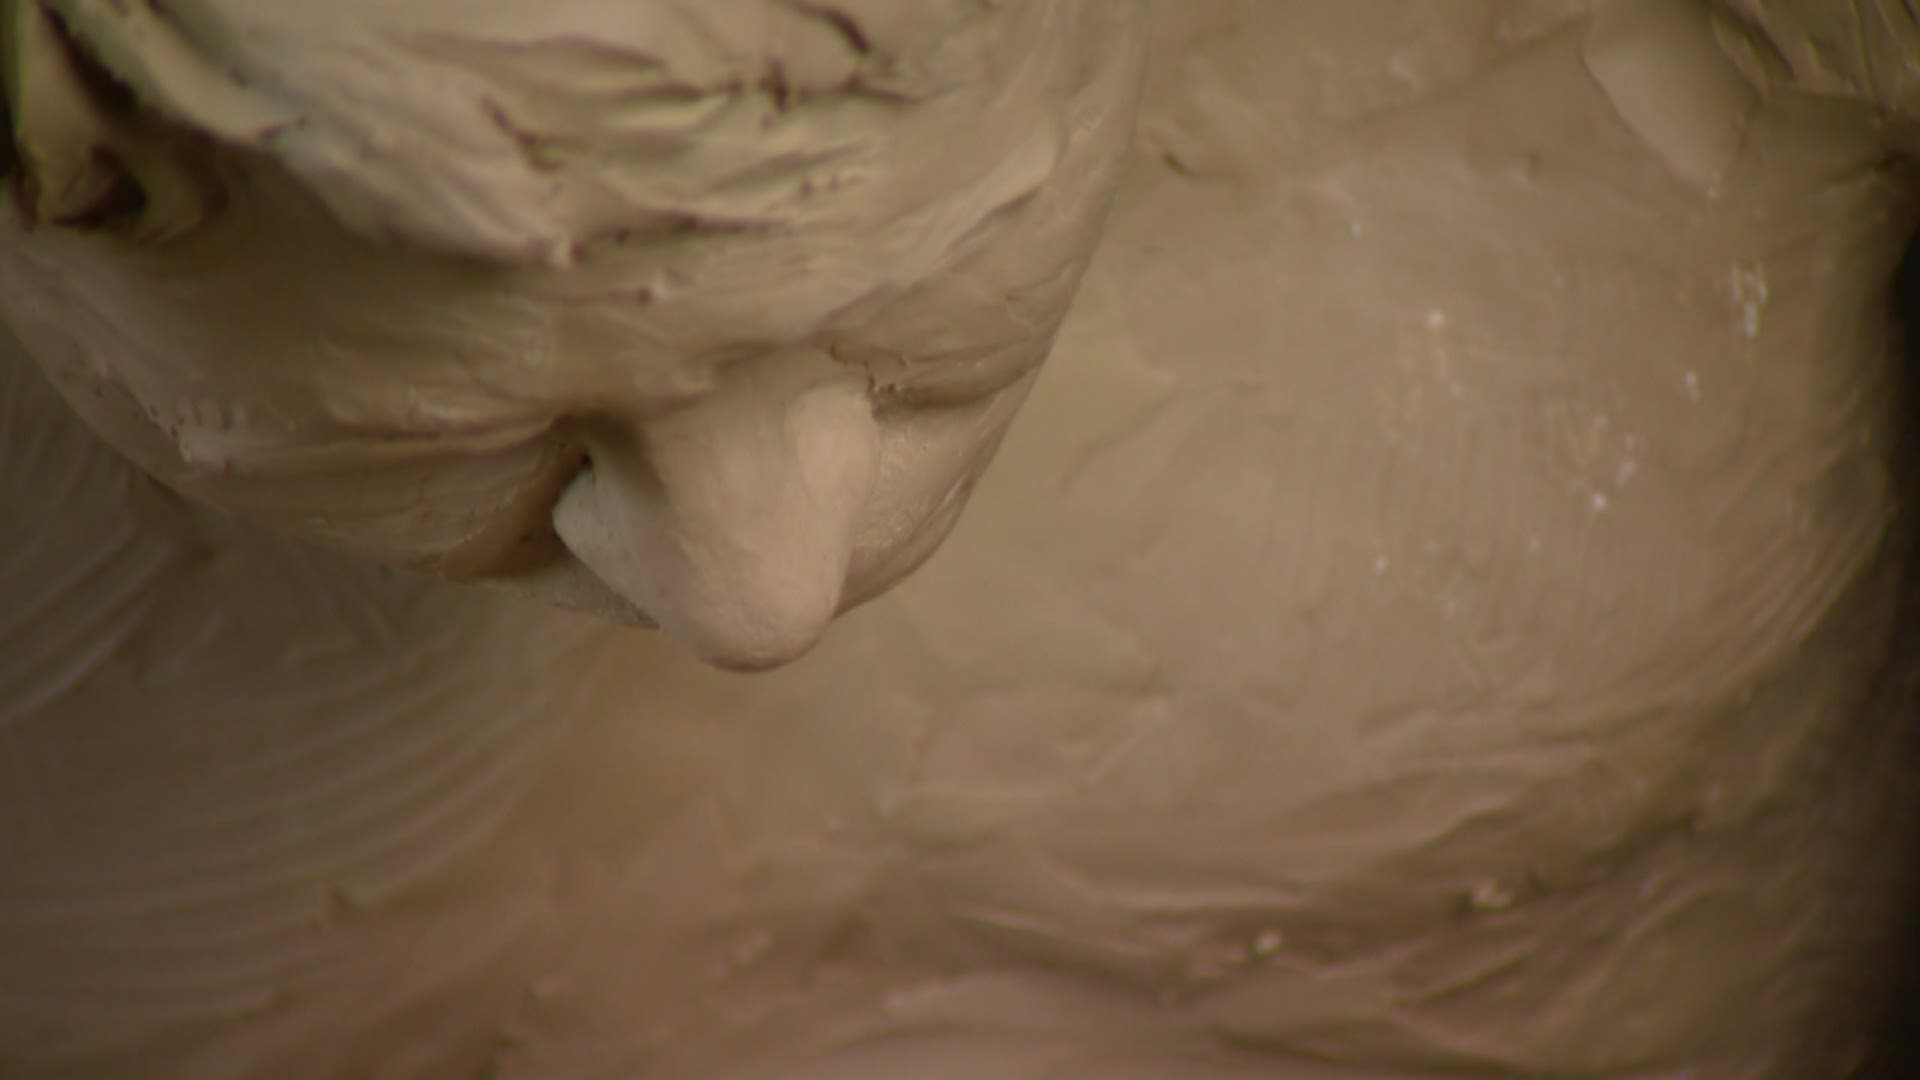 It's not clear what remains in store for a bronze sculpture created in a Boulder, Colo. art studio, but the artist behind it knows it's almost certainly saved at least one life. This is "The Promise" A 9NEWS Documentary